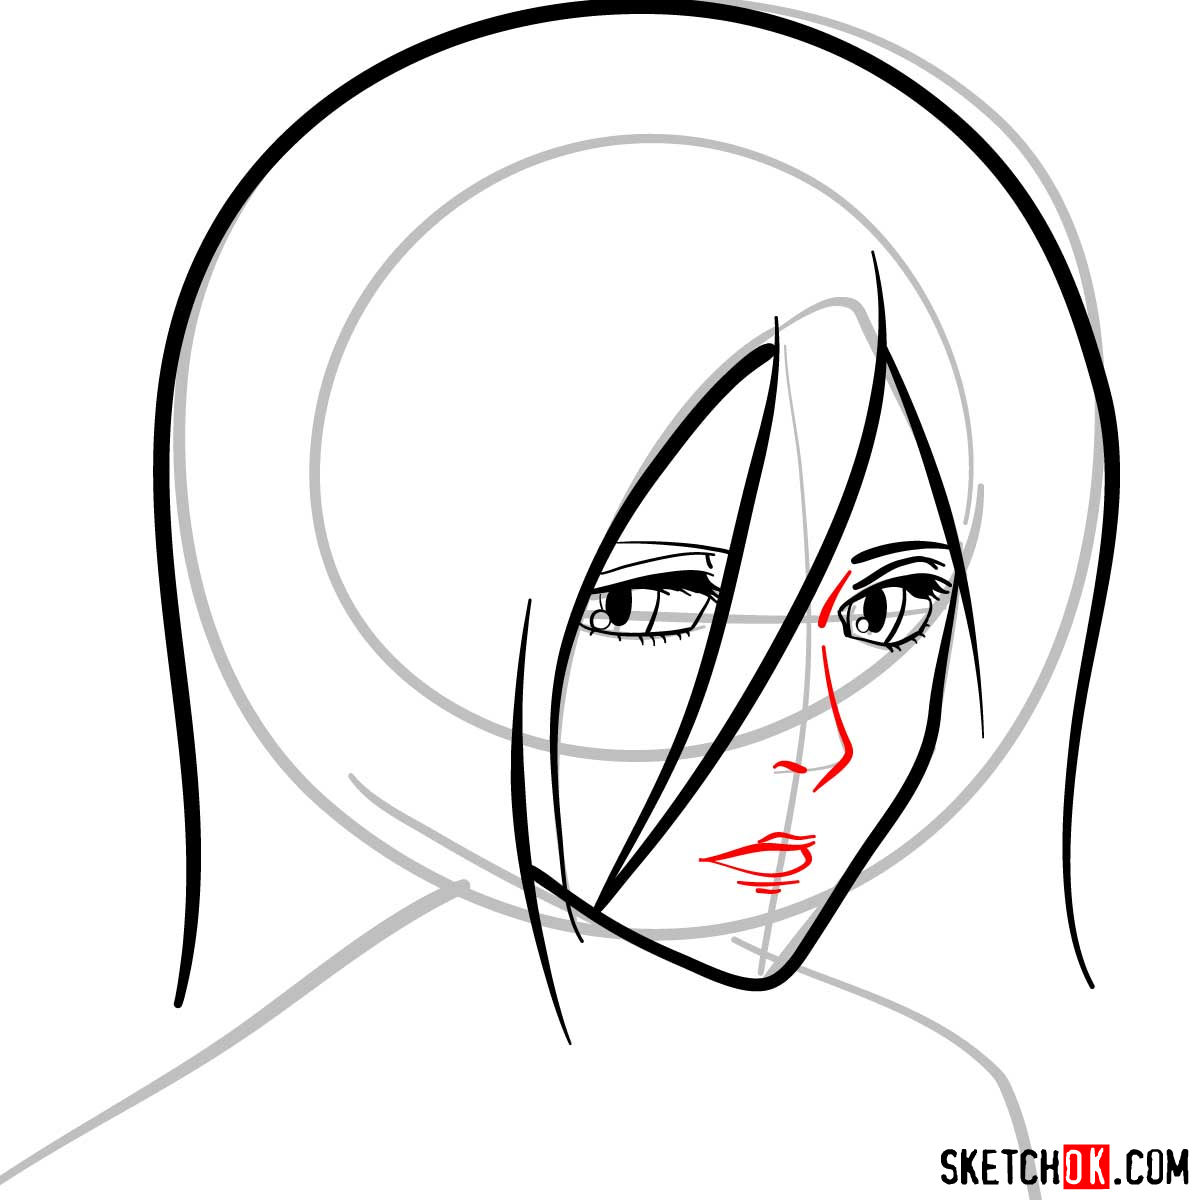 Making A Portrait Of Mikasa Ackerman In 9 Steps Sketchok Mikasa ackerman (ミカサ・アッカーマン mikasa akkaman?) is the adoptive sister of eren yeager and one of the two deuteragonists of the series, along with armin arlert. making a portrait of mikasa ackerman in